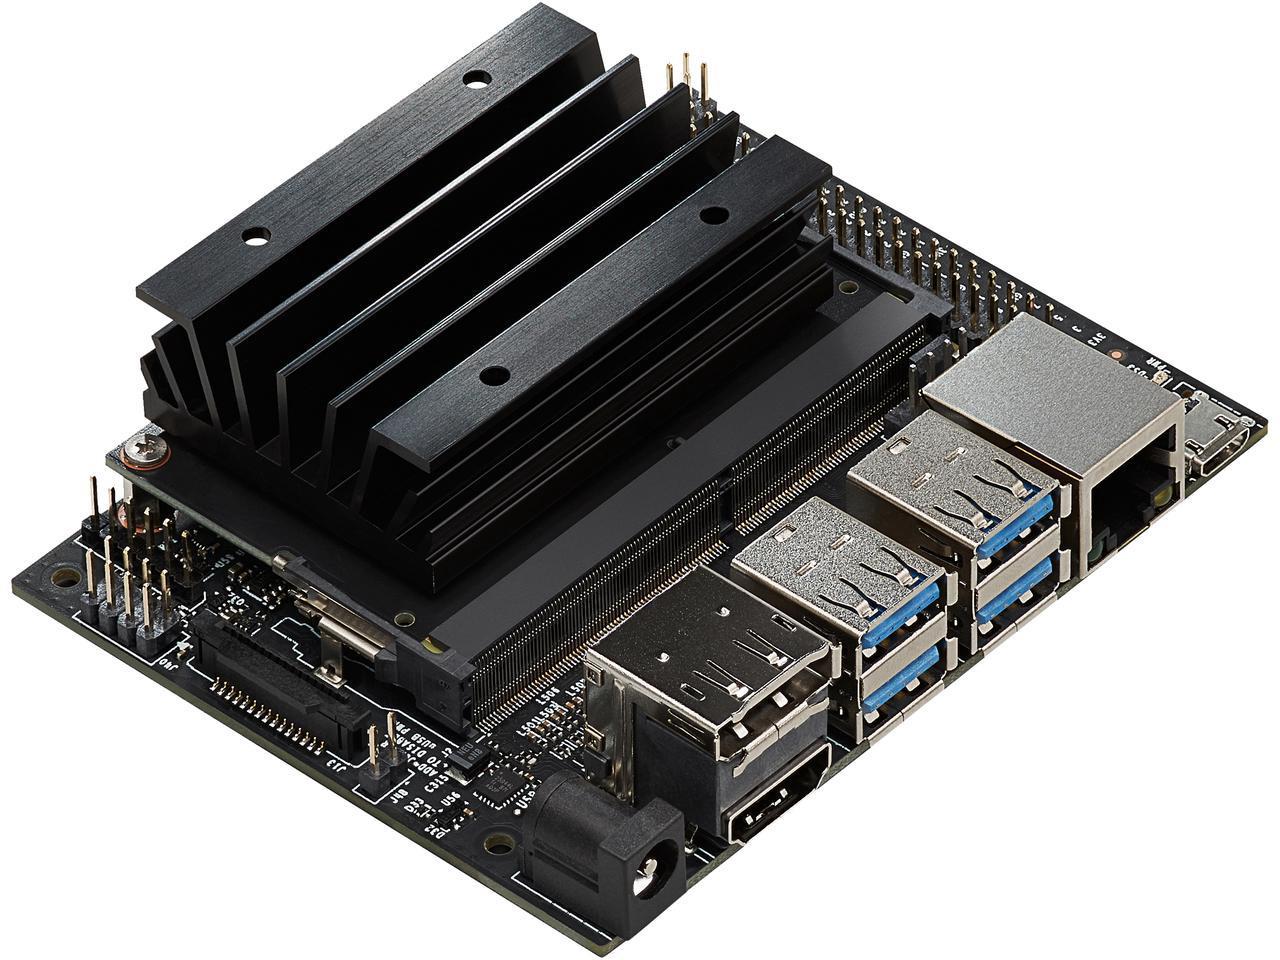 Nvidia Jetson Nano: What is it, and what can it do?